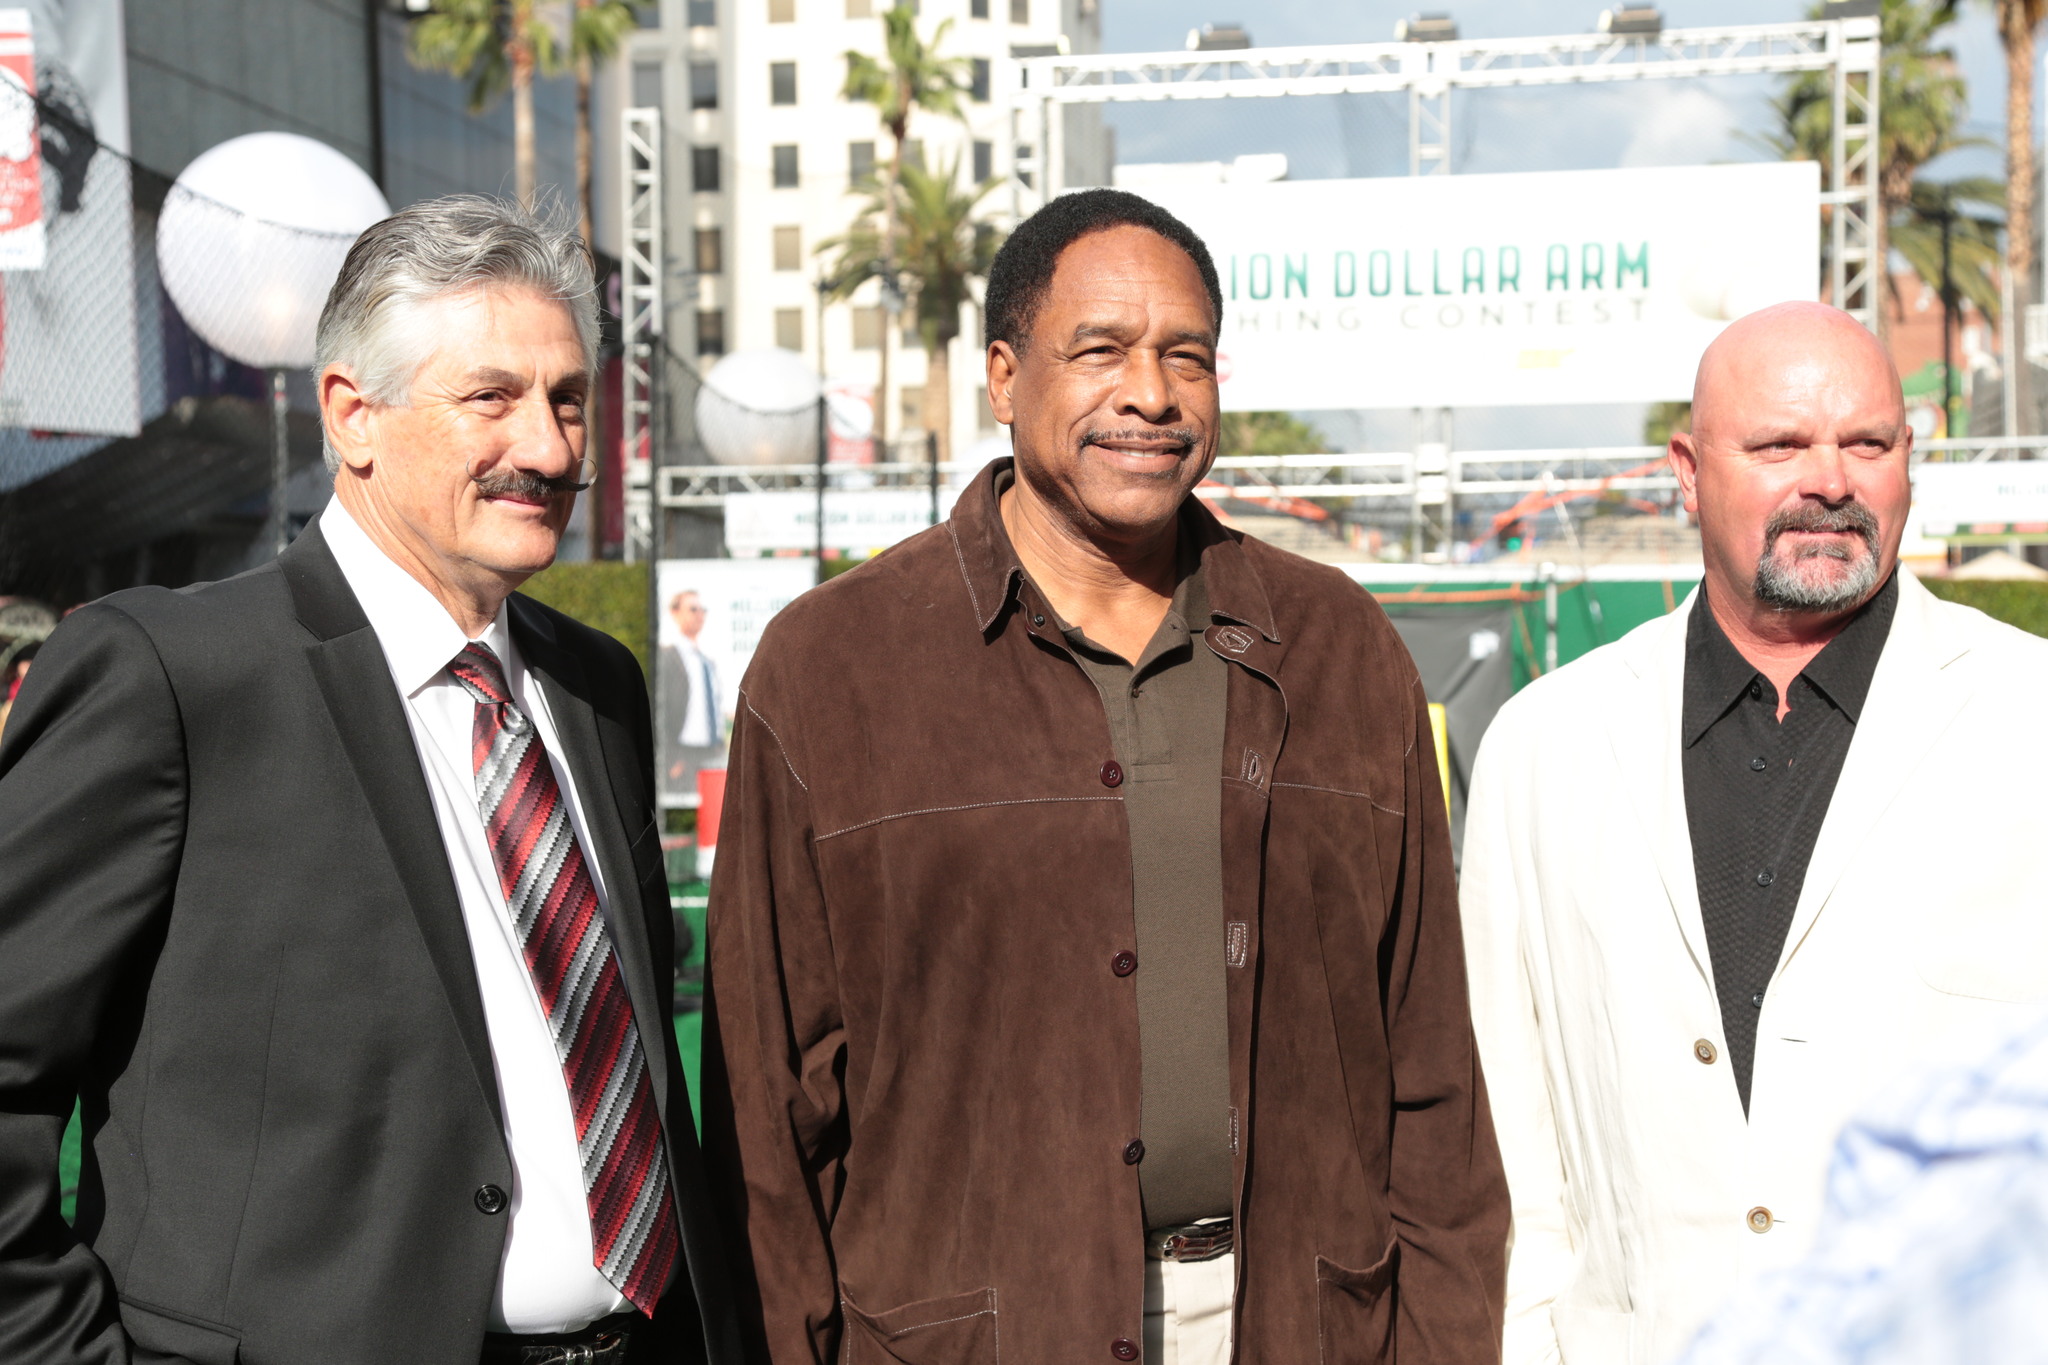 David Wells, Dave Winfield and Rollie Fingers at event of Million Dollar Arm (2014)